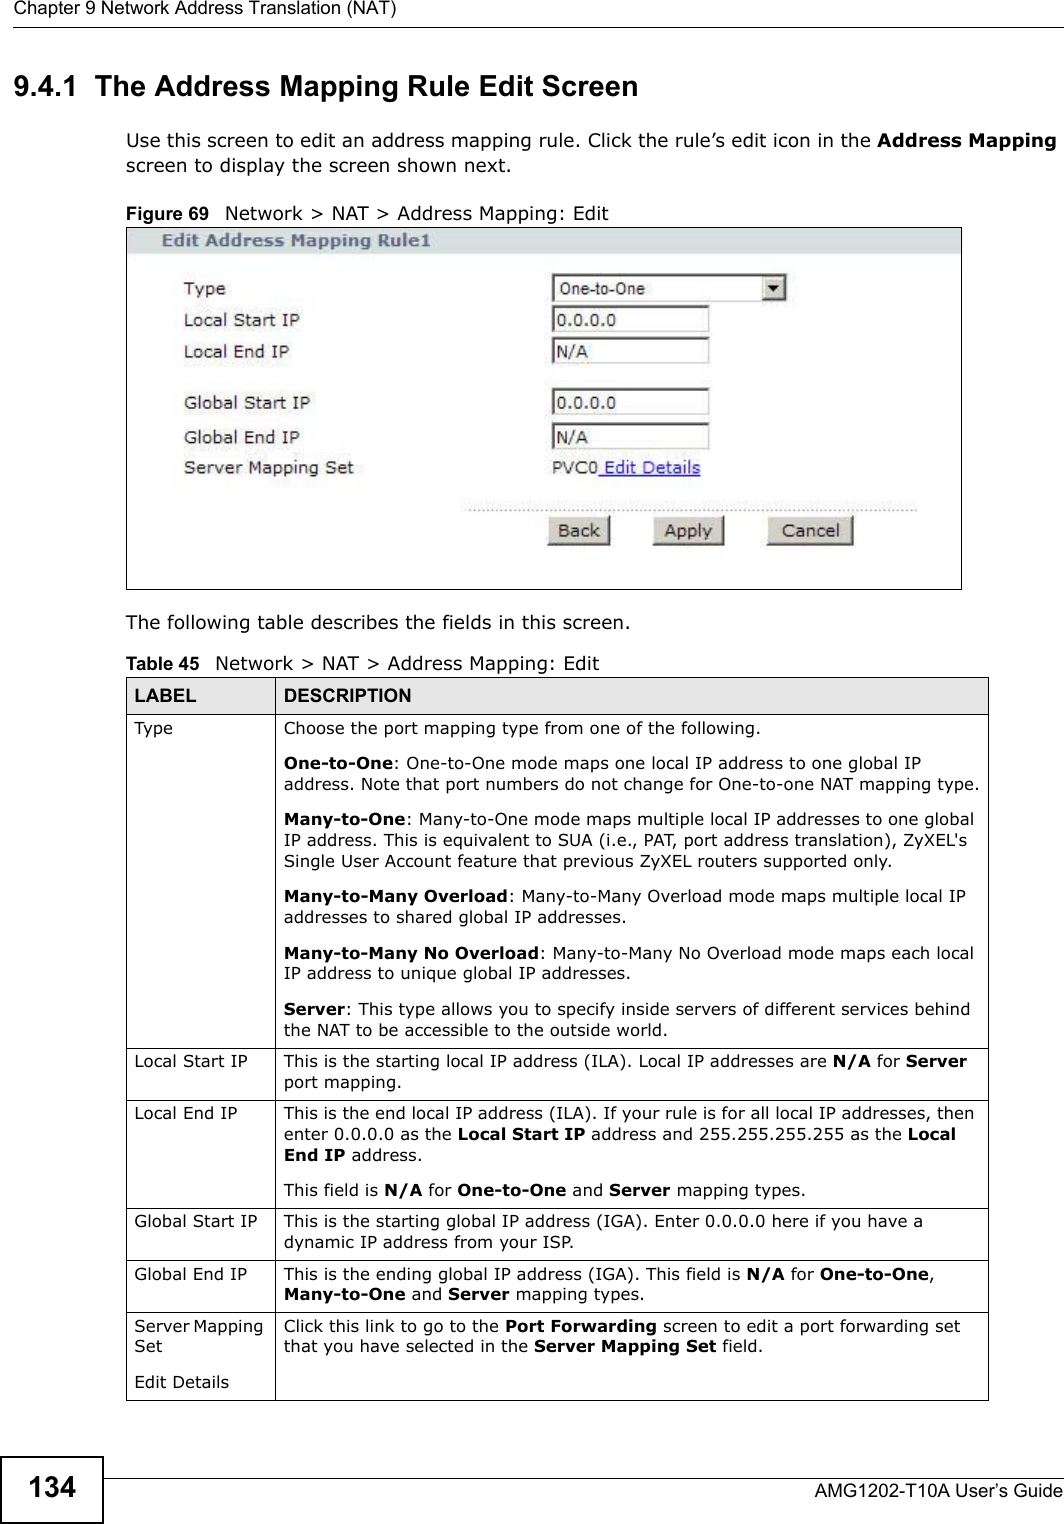 Chapter 9 Network Address Translation (NAT)AMG1202-T10A User’s Guide1349.4.1  The Address Mapping Rule Edit ScreenUse this screen to edit an address mapping rule. Click the rule’s edit icon in the Address Mapping screen to display the screen shown next.Figure 69   Network &gt; NAT &gt; Address Mapping: Edit The following table describes the fields in this screen.Table 45   Network &gt; NAT &gt; Address Mapping: Edit LABEL DESCRIPTIONType Choose the port mapping type from one of the following. One-to-One: One-to-One mode maps one local IP address to one global IP address. Note that port numbers do not change for One-to-one NAT mapping type.Many-to-One: Many-to-One mode maps multiple local IP addresses to one global IP address. This is equivalent to SUA (i.e., PAT, port address translation), ZyXEL&apos;s Single User Account feature that previous ZyXEL routers supported only. Many-to-Many Overload: Many-to-Many Overload mode maps multiple local IP addresses to shared global IP addresses. Many-to-Many No Overload: Many-to-Many No Overload mode maps each local IP address to unique global IP addresses. Server: This type allows you to specify inside servers of different services behind the NAT to be accessible to the outside world.Local Start IP This is the starting local IP address (ILA). Local IP addresses are N/A for Server port mapping.Local End IP This is the end local IP address (ILA). If your rule is for all local IP addresses, then enter 0.0.0.0 as the Local Start IP address and 255.255.255.255 as the Local End IP address. This field is N/A for One-to-One and Server mapping types.Global Start IP This is the starting global IP address (IGA). Enter 0.0.0.0 here if you have a dynamic IP address from your ISP. Global End IP This is the ending global IP address (IGA). This field is N/A for One-to-One, Many-to-One and Server mapping types.Server Mapping SetEdit DetailsClick this link to go to the Port Forwarding screen to edit a port forwarding set that you have selected in the Server Mapping Set field.